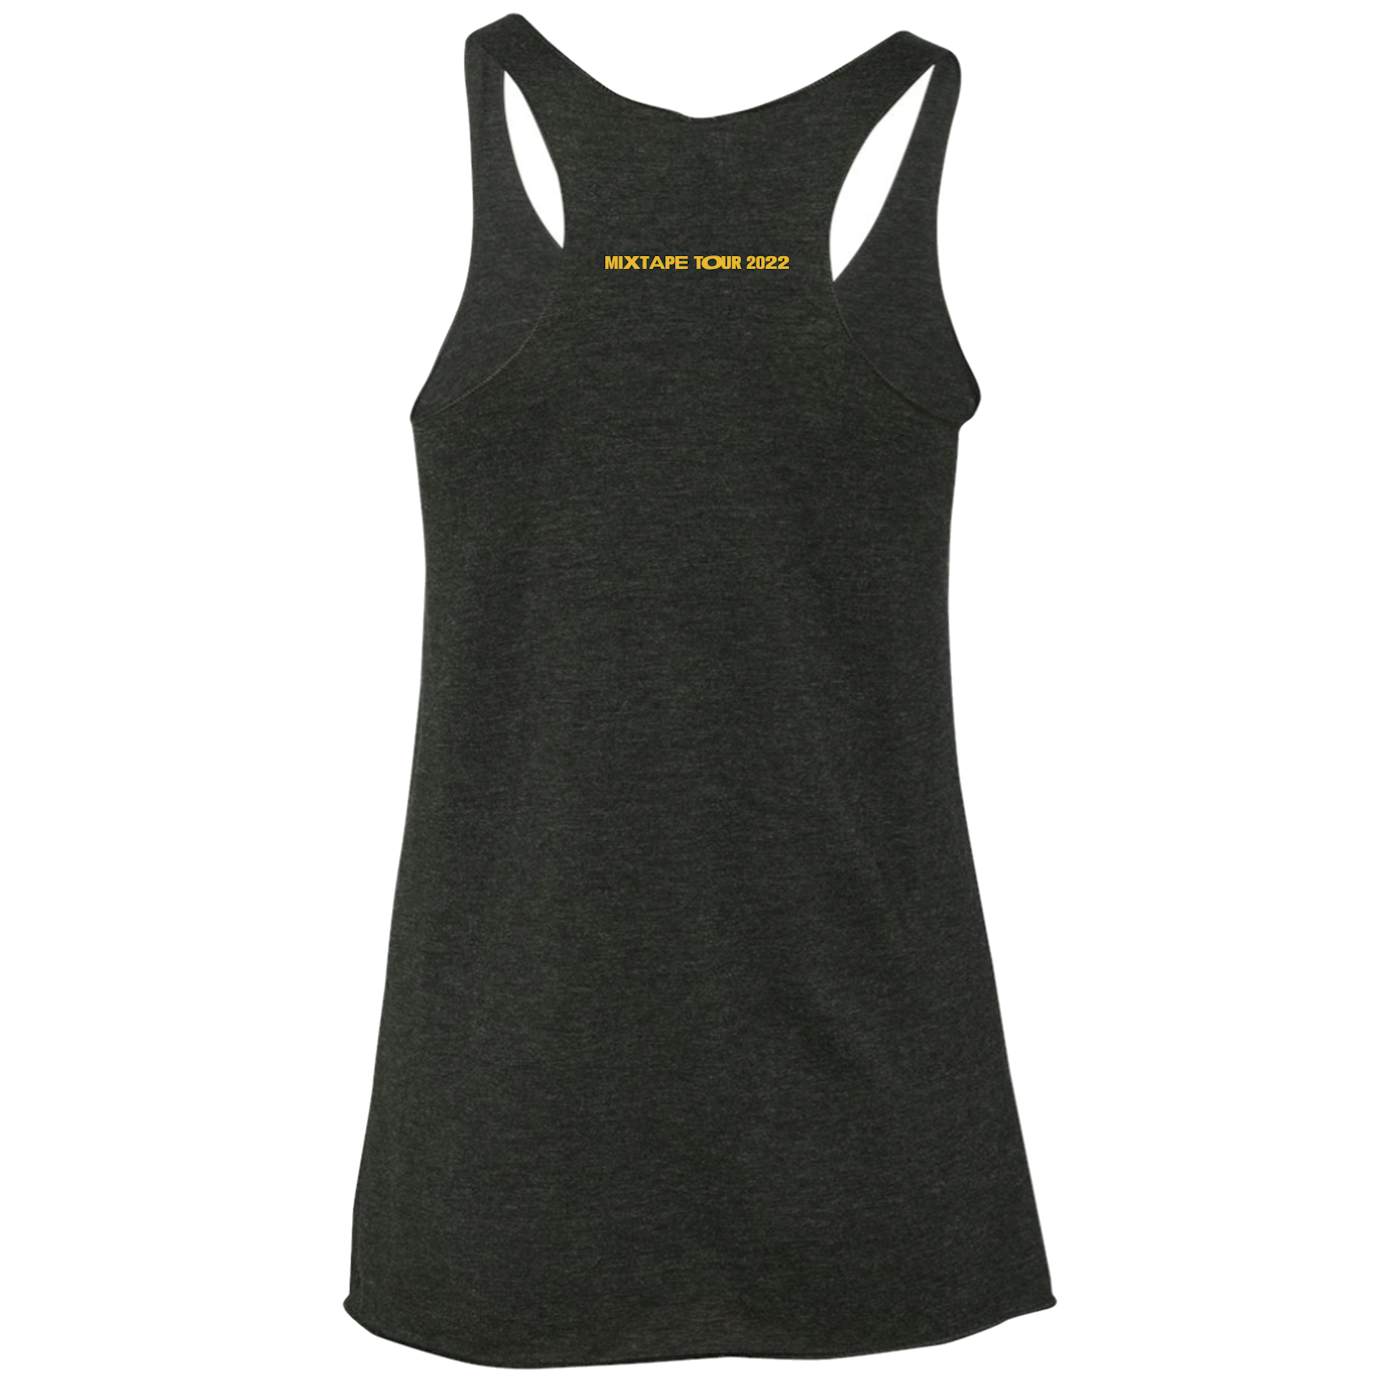 New Kids On The Block The Mixtape Tour Loving You Forever Ladies Tank Top